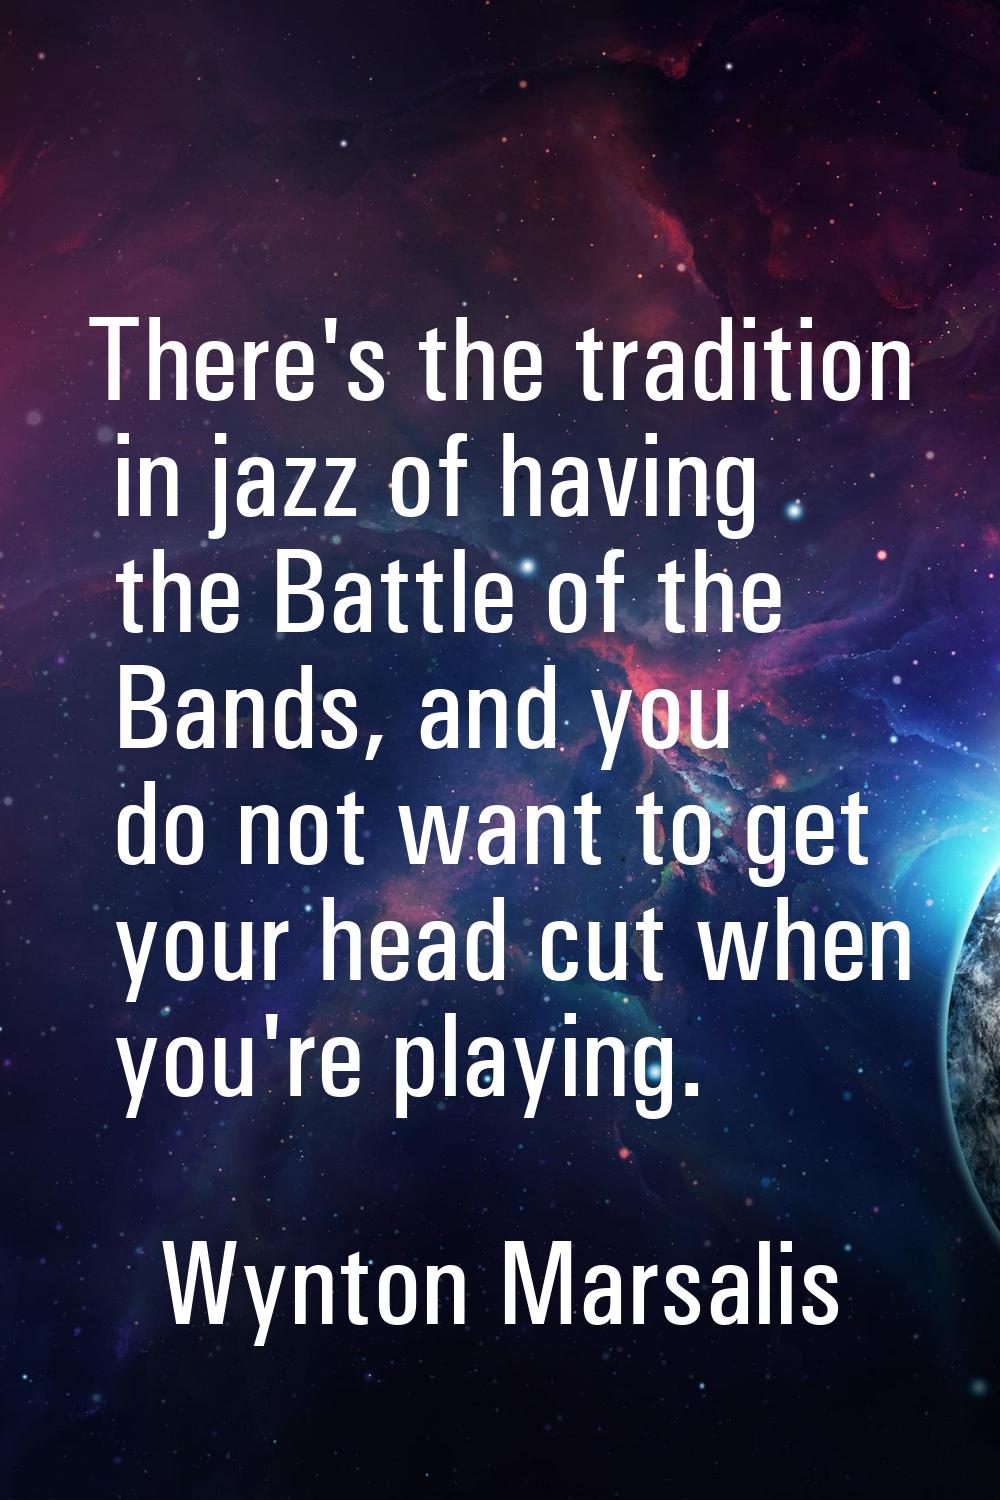 There's the tradition in jazz of having the Battle of the Bands, and you do not want to get your he